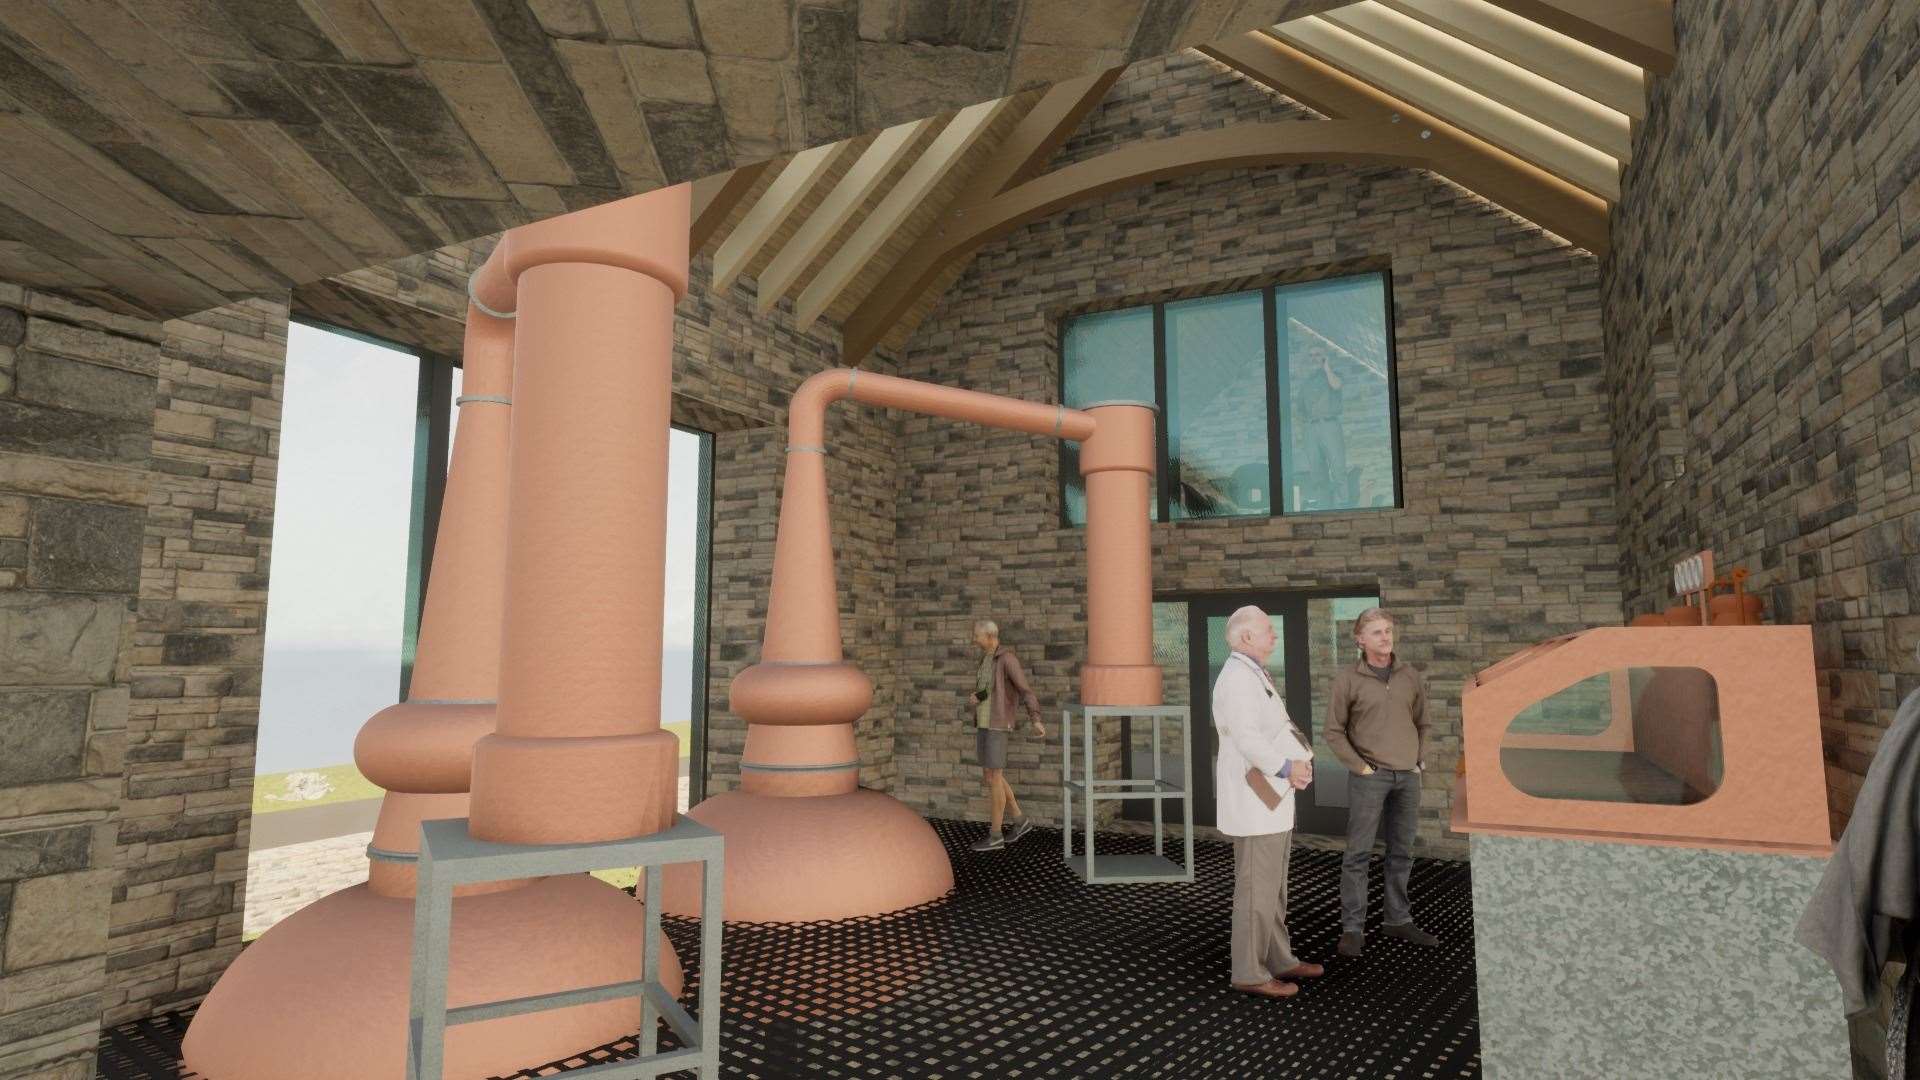 The old mill will be converted into a whisky distillery and visitor centre.